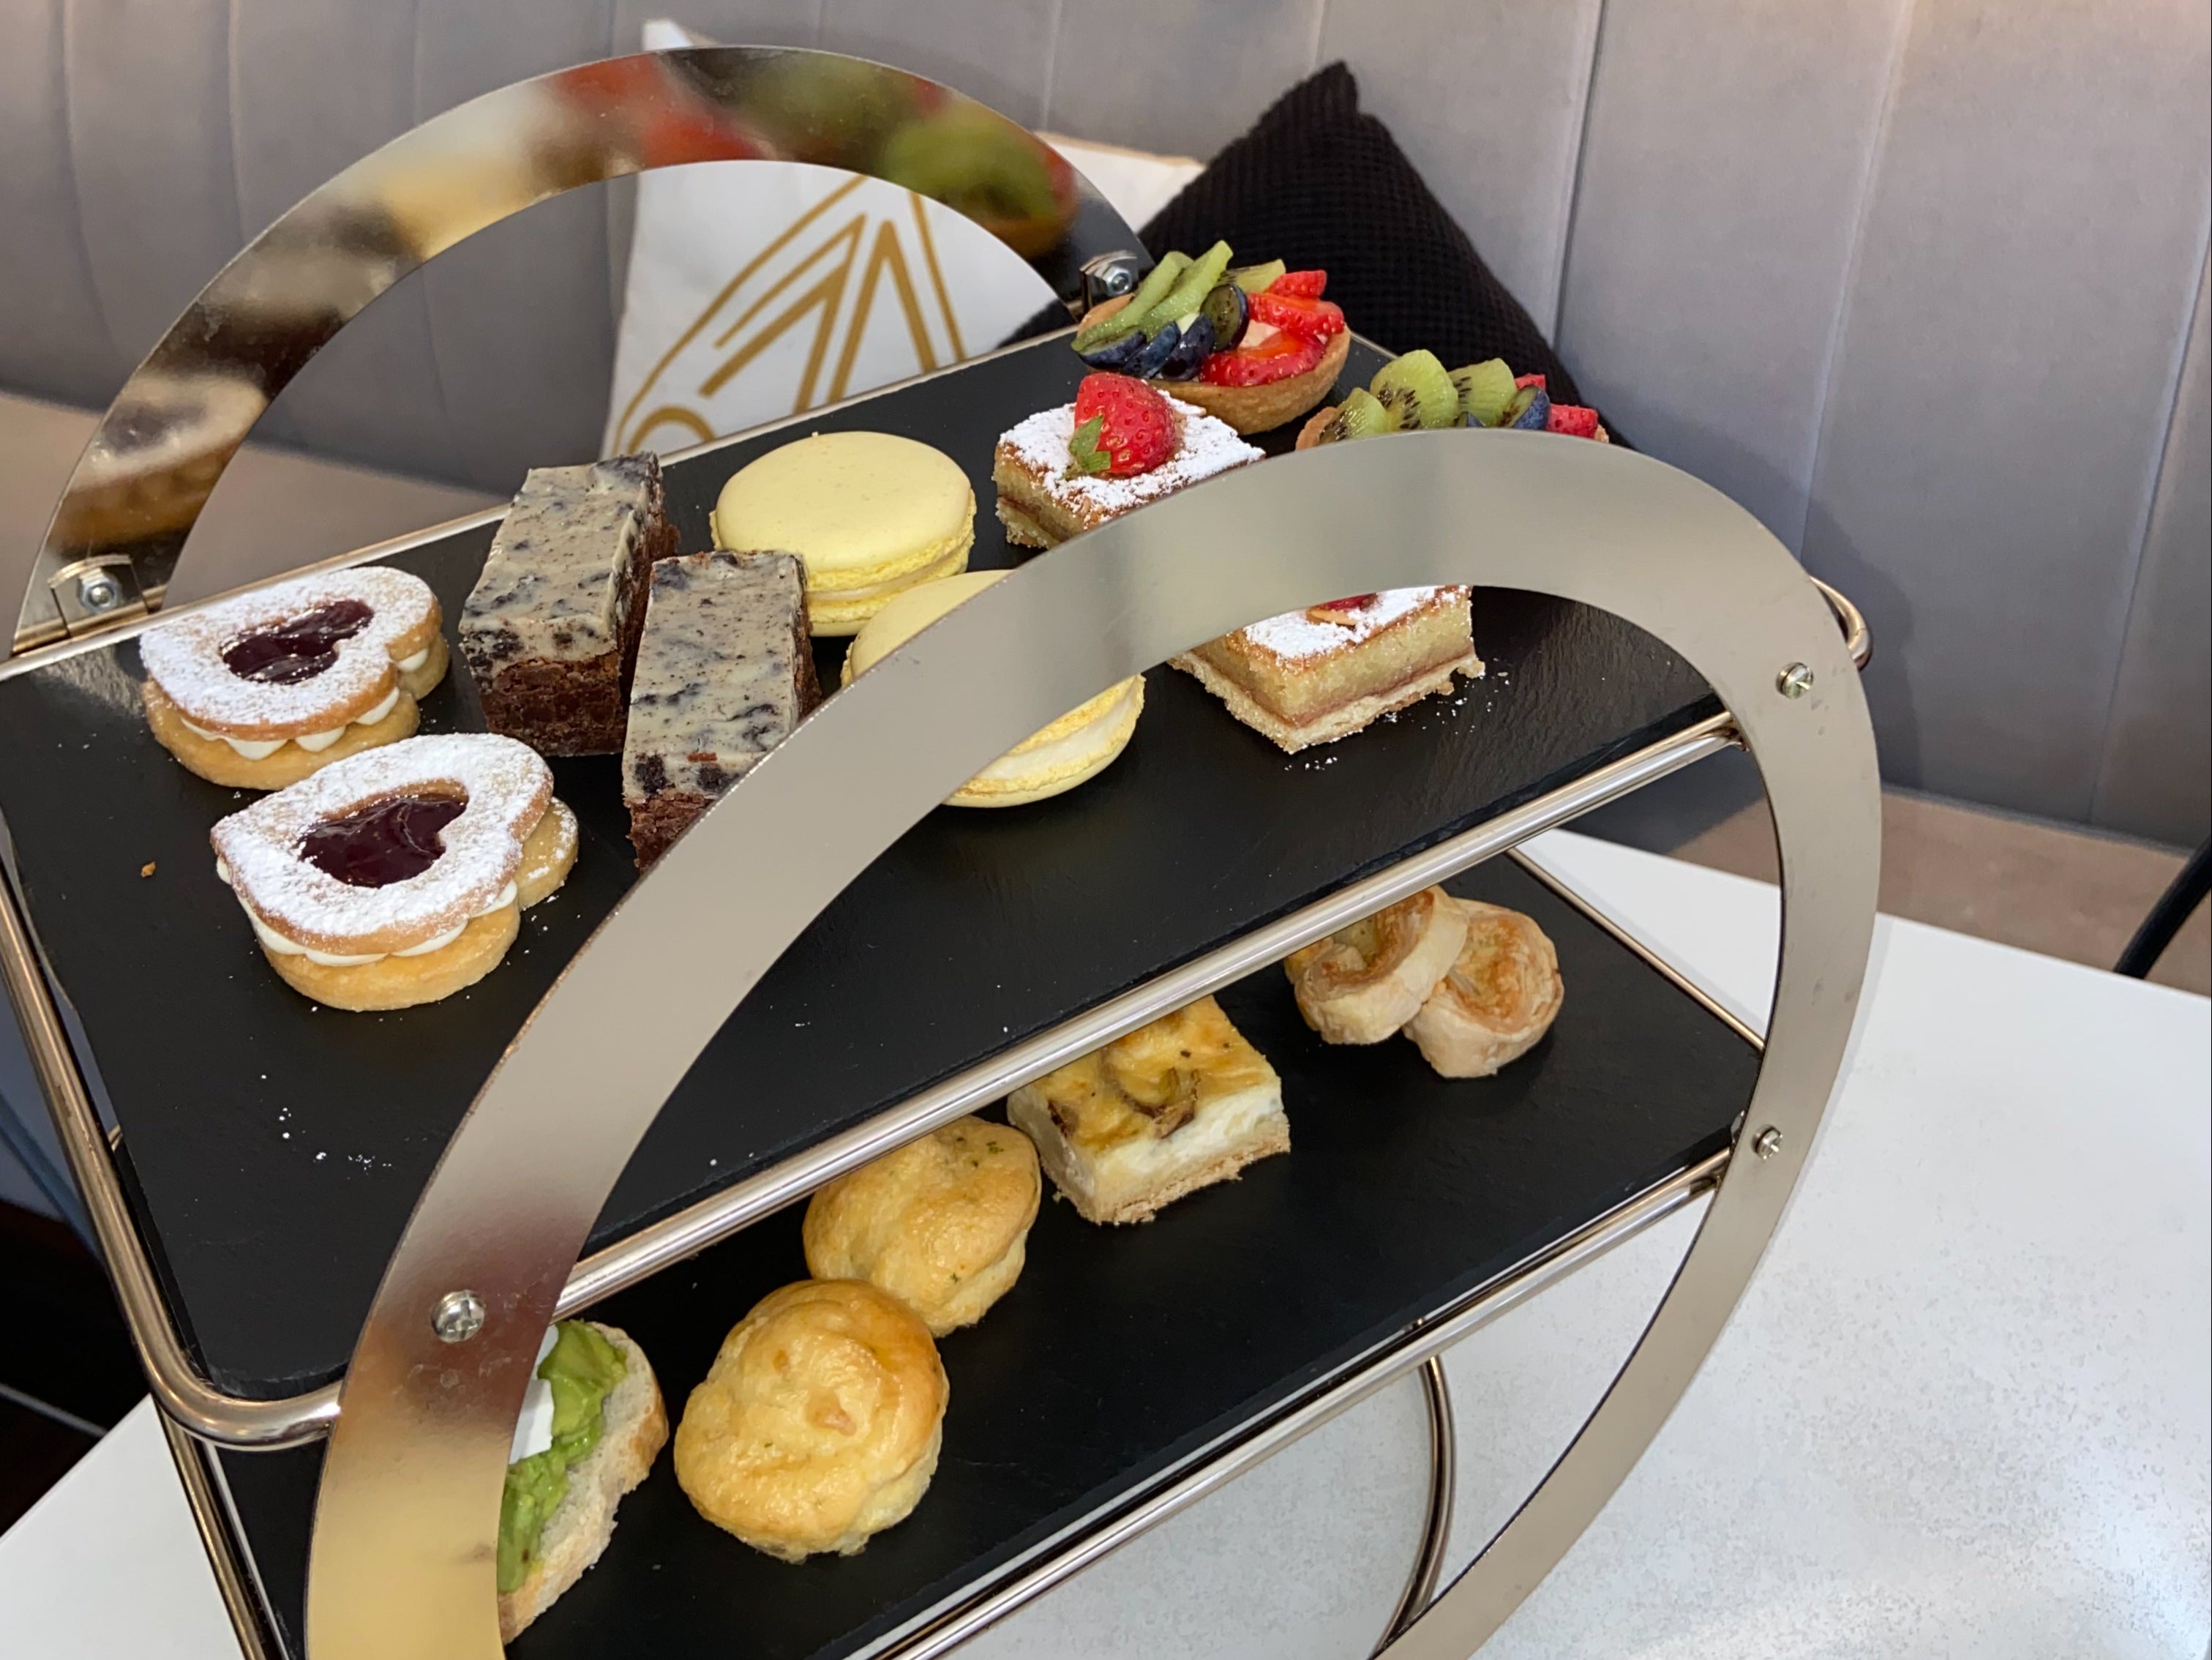 The afternoon tea tray features far more than cucumber and watercress sandwiches